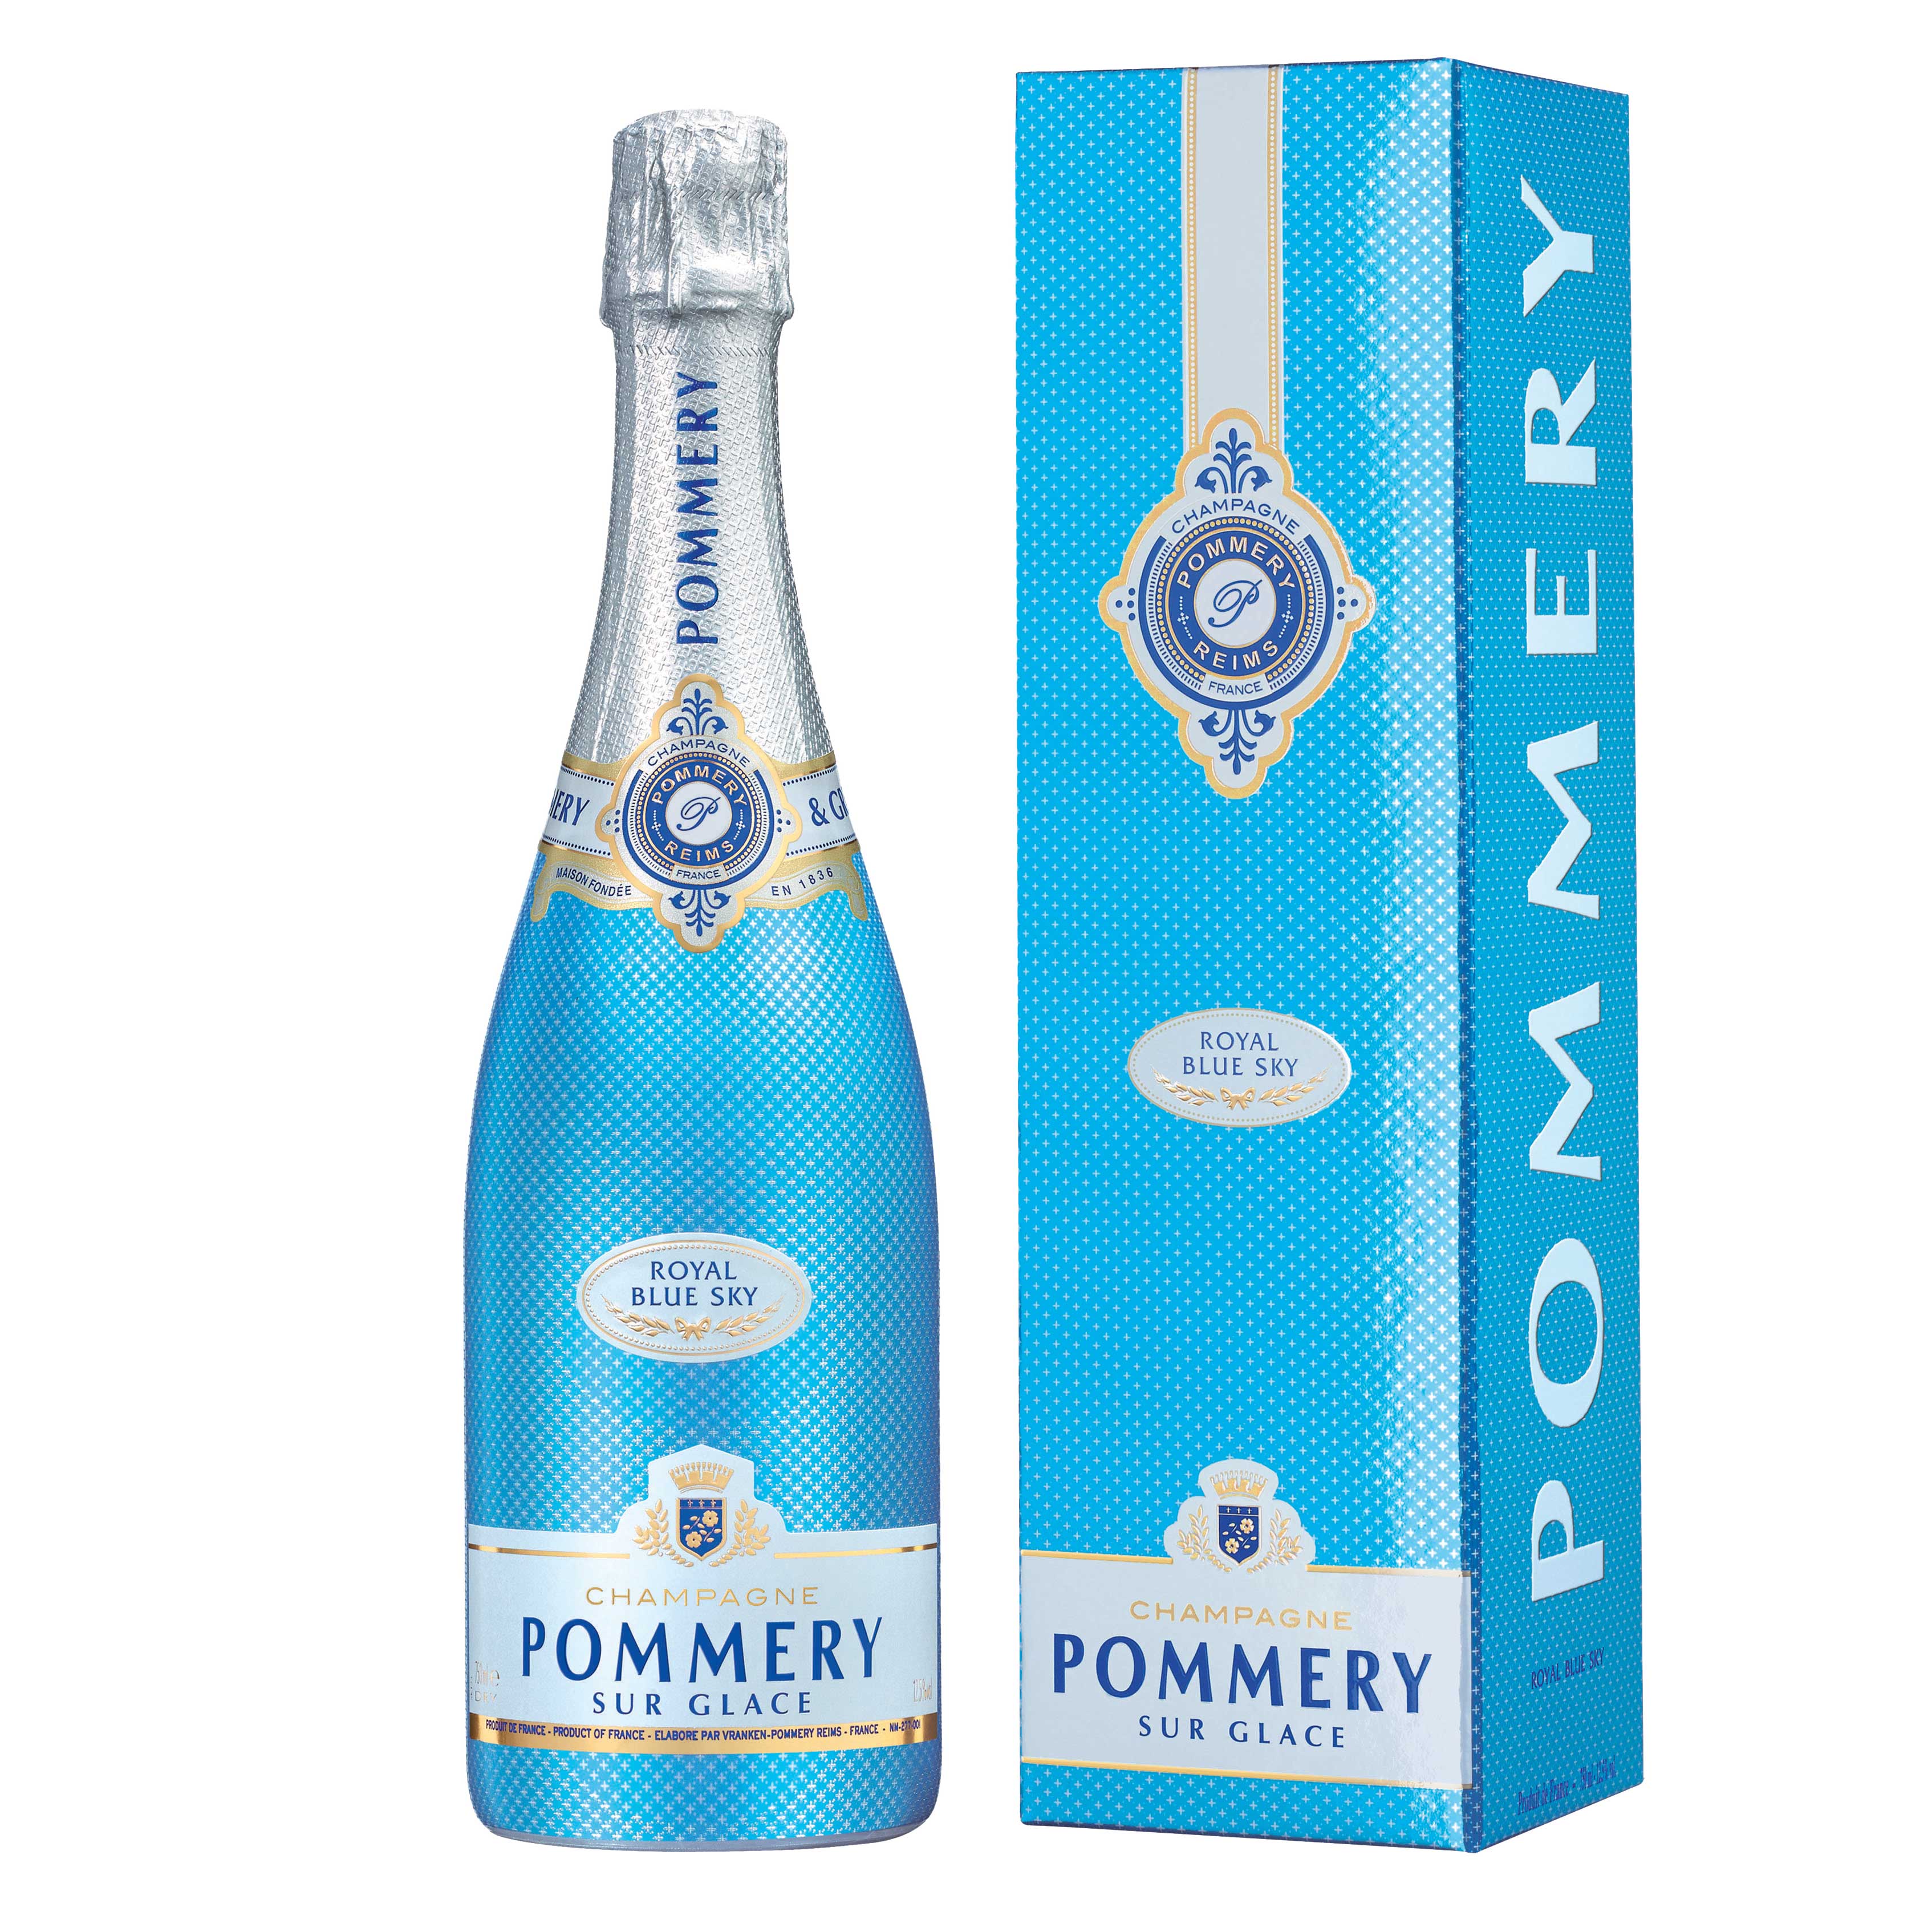 Pommery Blue Sky Champagne 75cl Great Price and Home Delivery